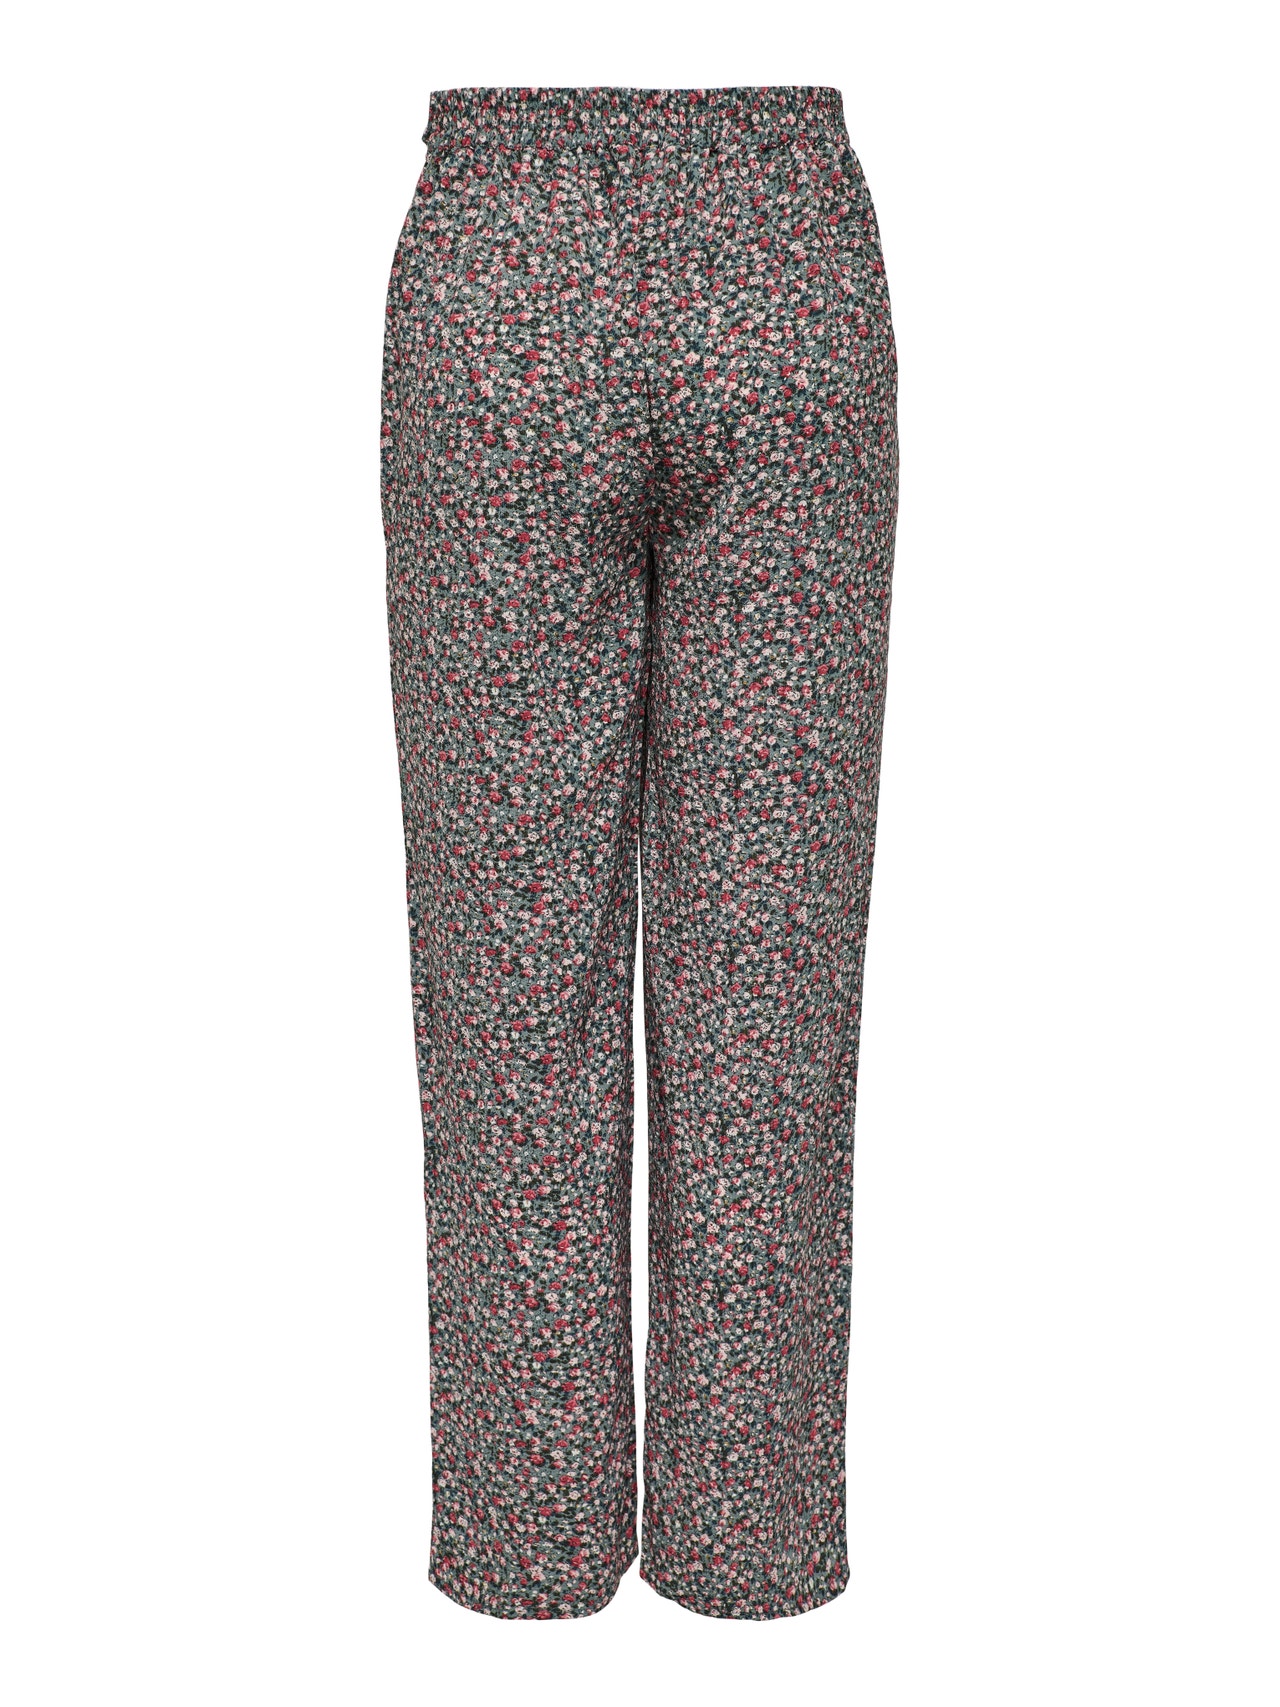 ONLY Patterned Trousers -Balsam Green - 15264449